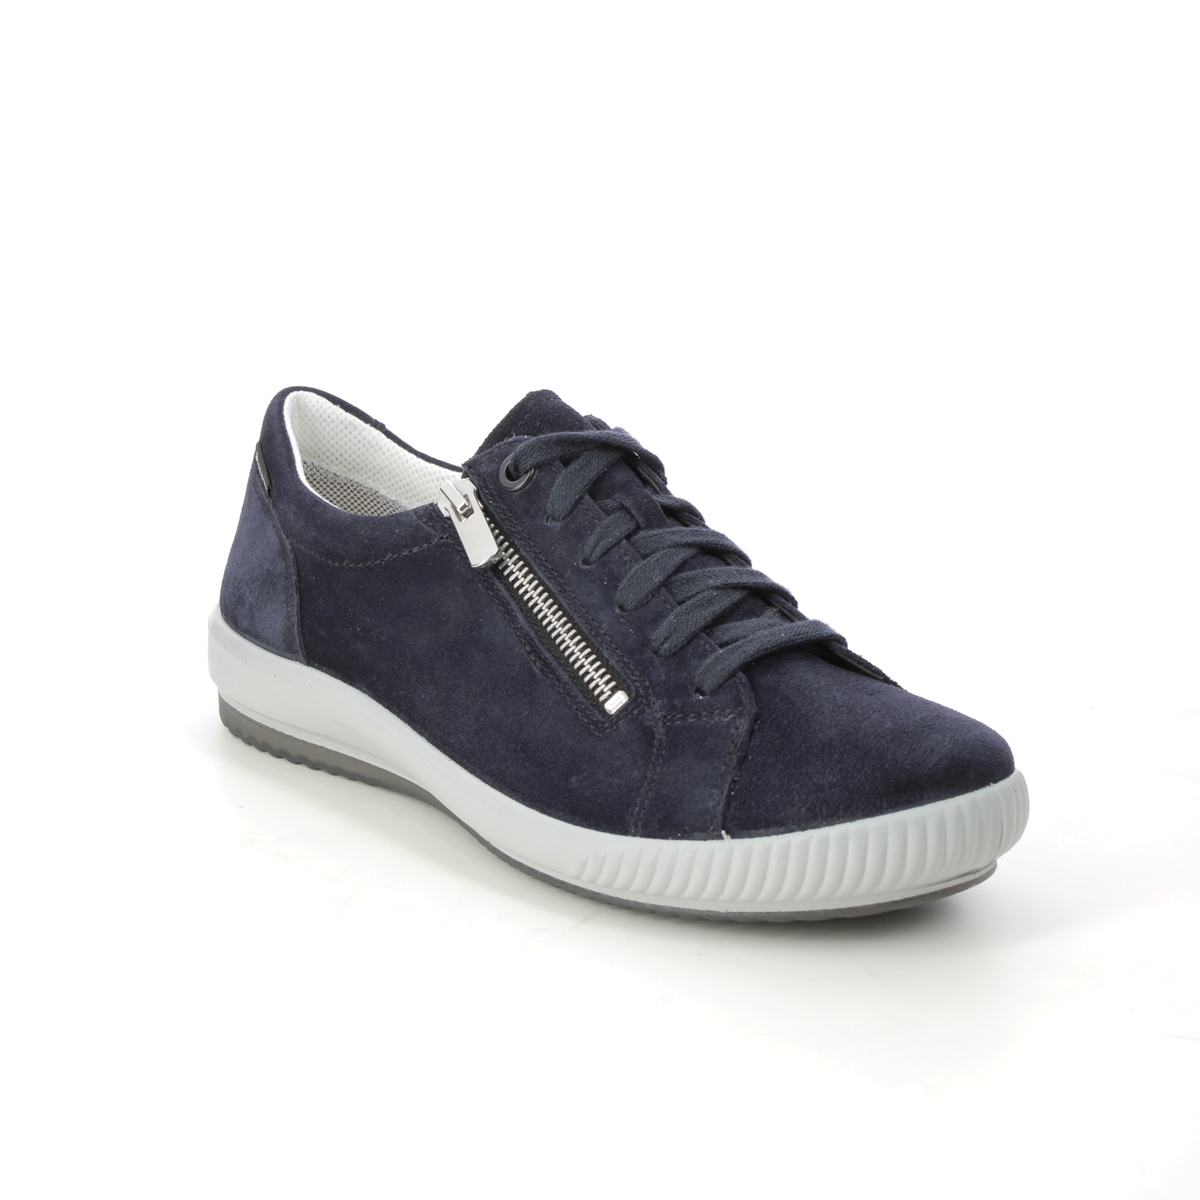 Legero Tanaro 5 Gtx Navy Suede Womens Lacing Shoes 2000219-8000 In Size 8 In Plain Navy Suede